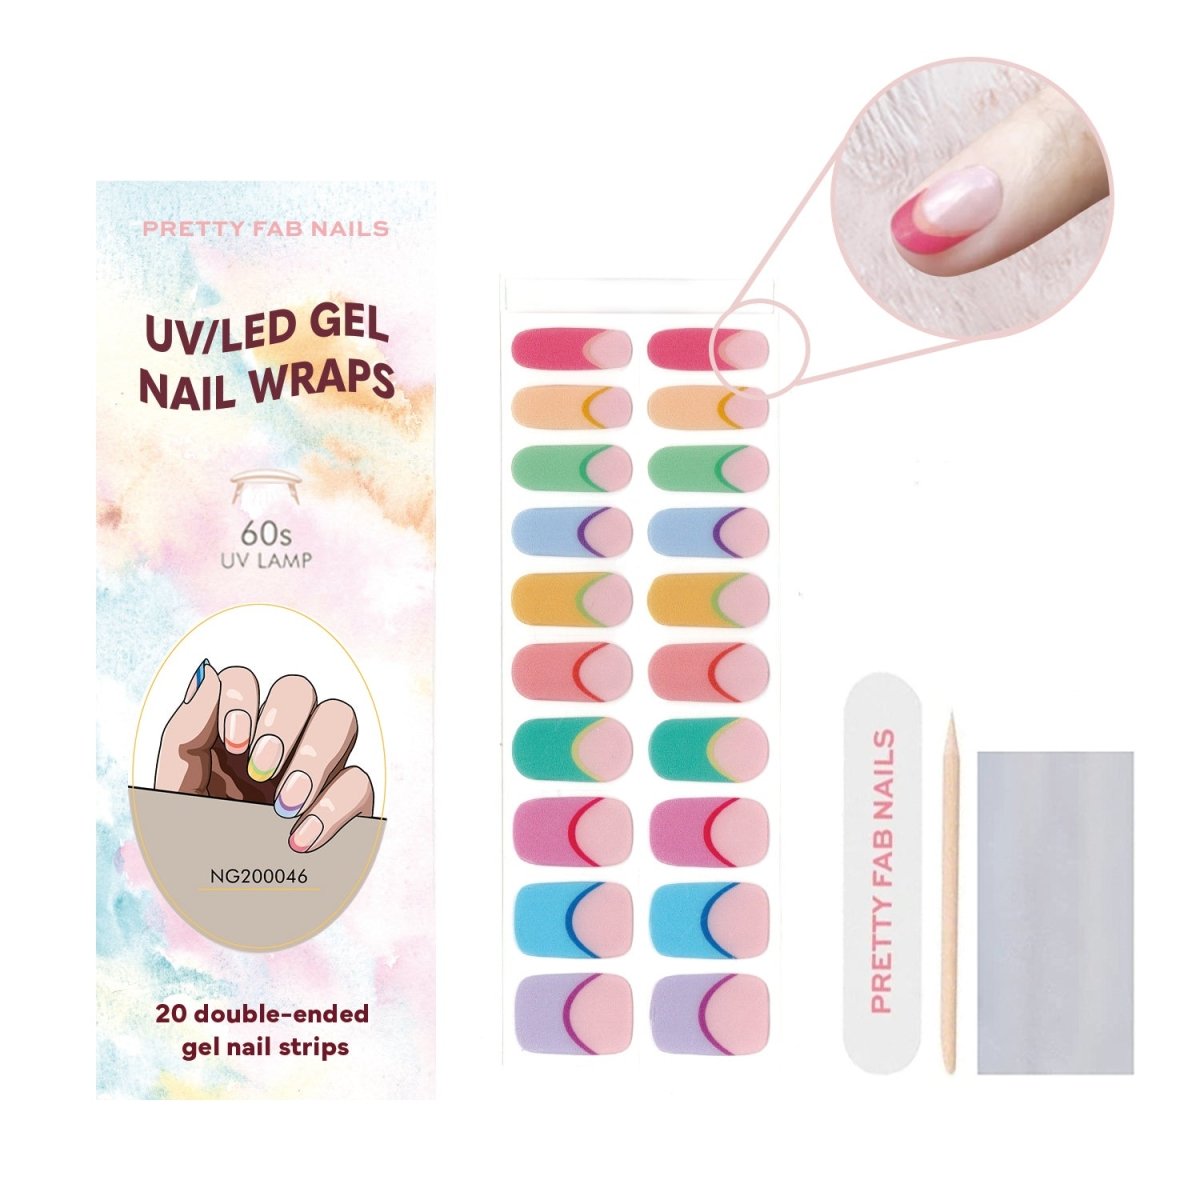 Candy French Semicured Gel Nail Wraps - Pretty Fab Nails